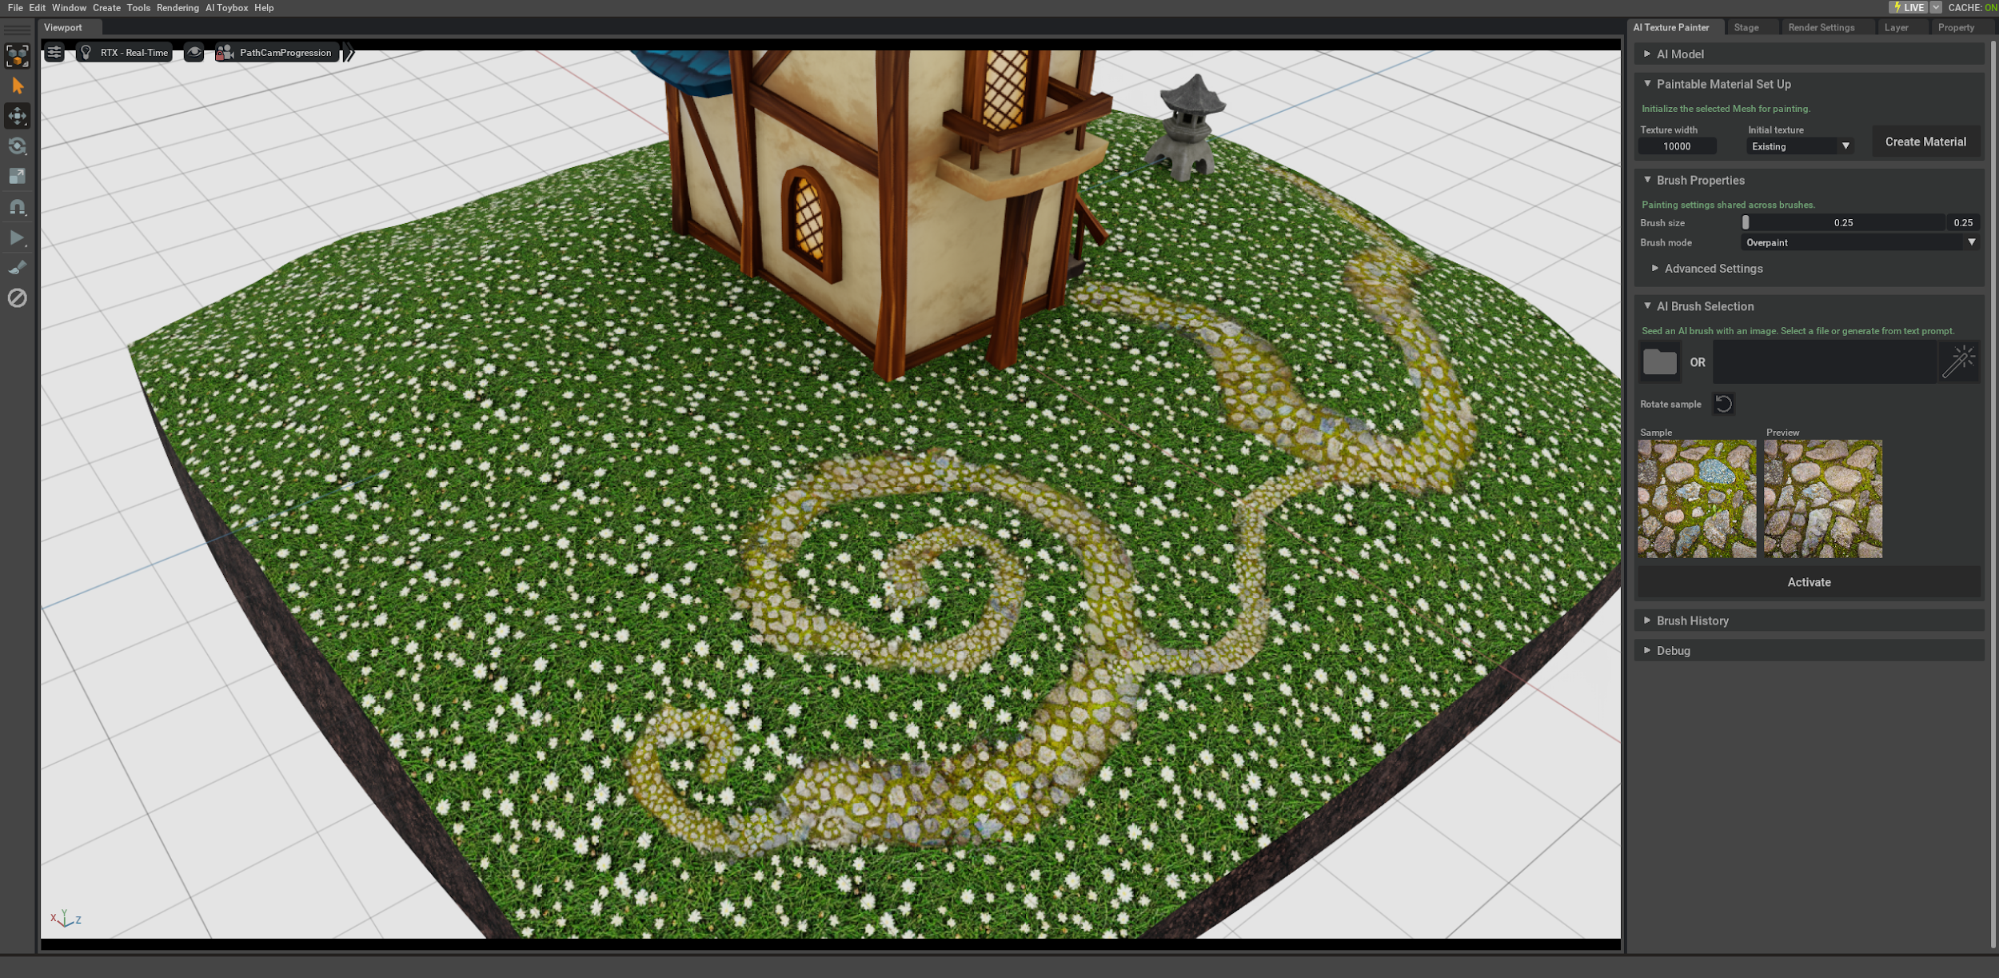 NVIDIA Omniverse interface showing a scene with a grass meadow and a house. A windy stone path goes through the meadow and includes swirls with varying stone sizes.